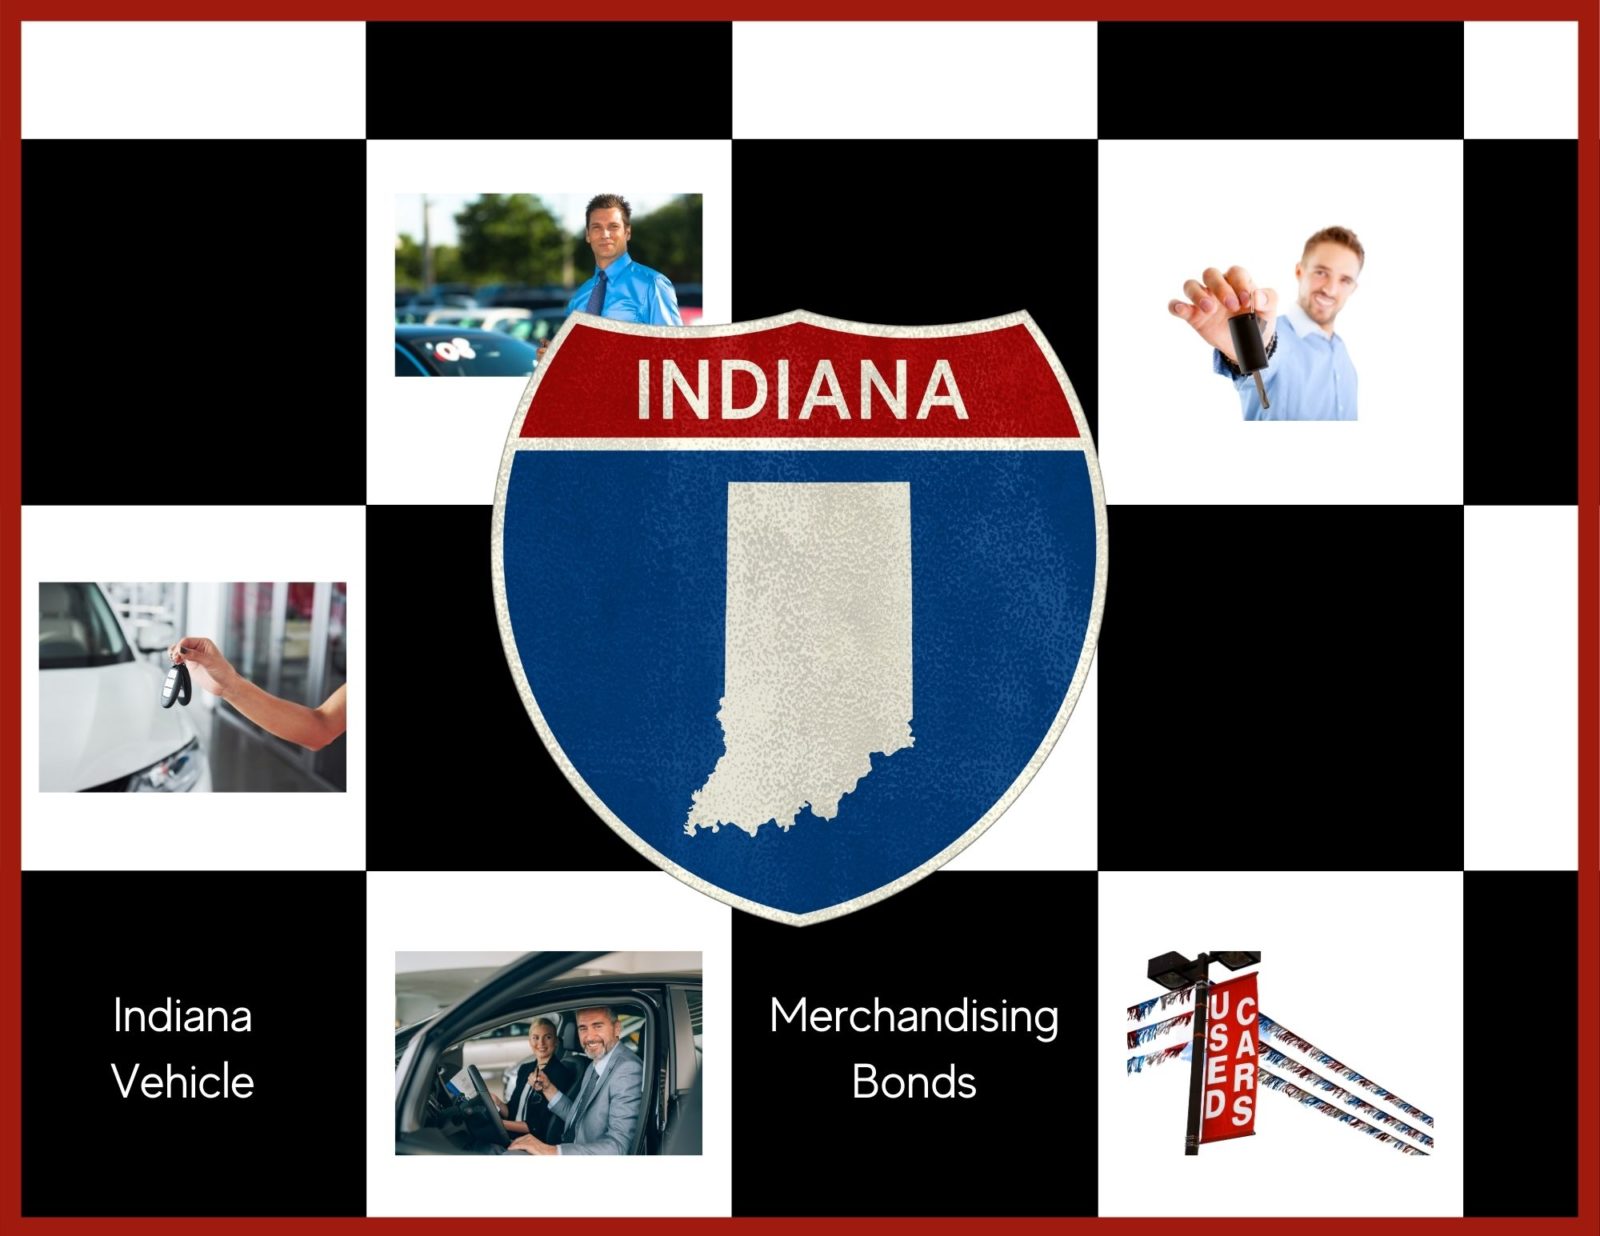 Indiana Vehicle Merchandising Bonds - This has an Indiana sign in the middle. The background is a black and white checkered pattern with pictures representing car dealers.